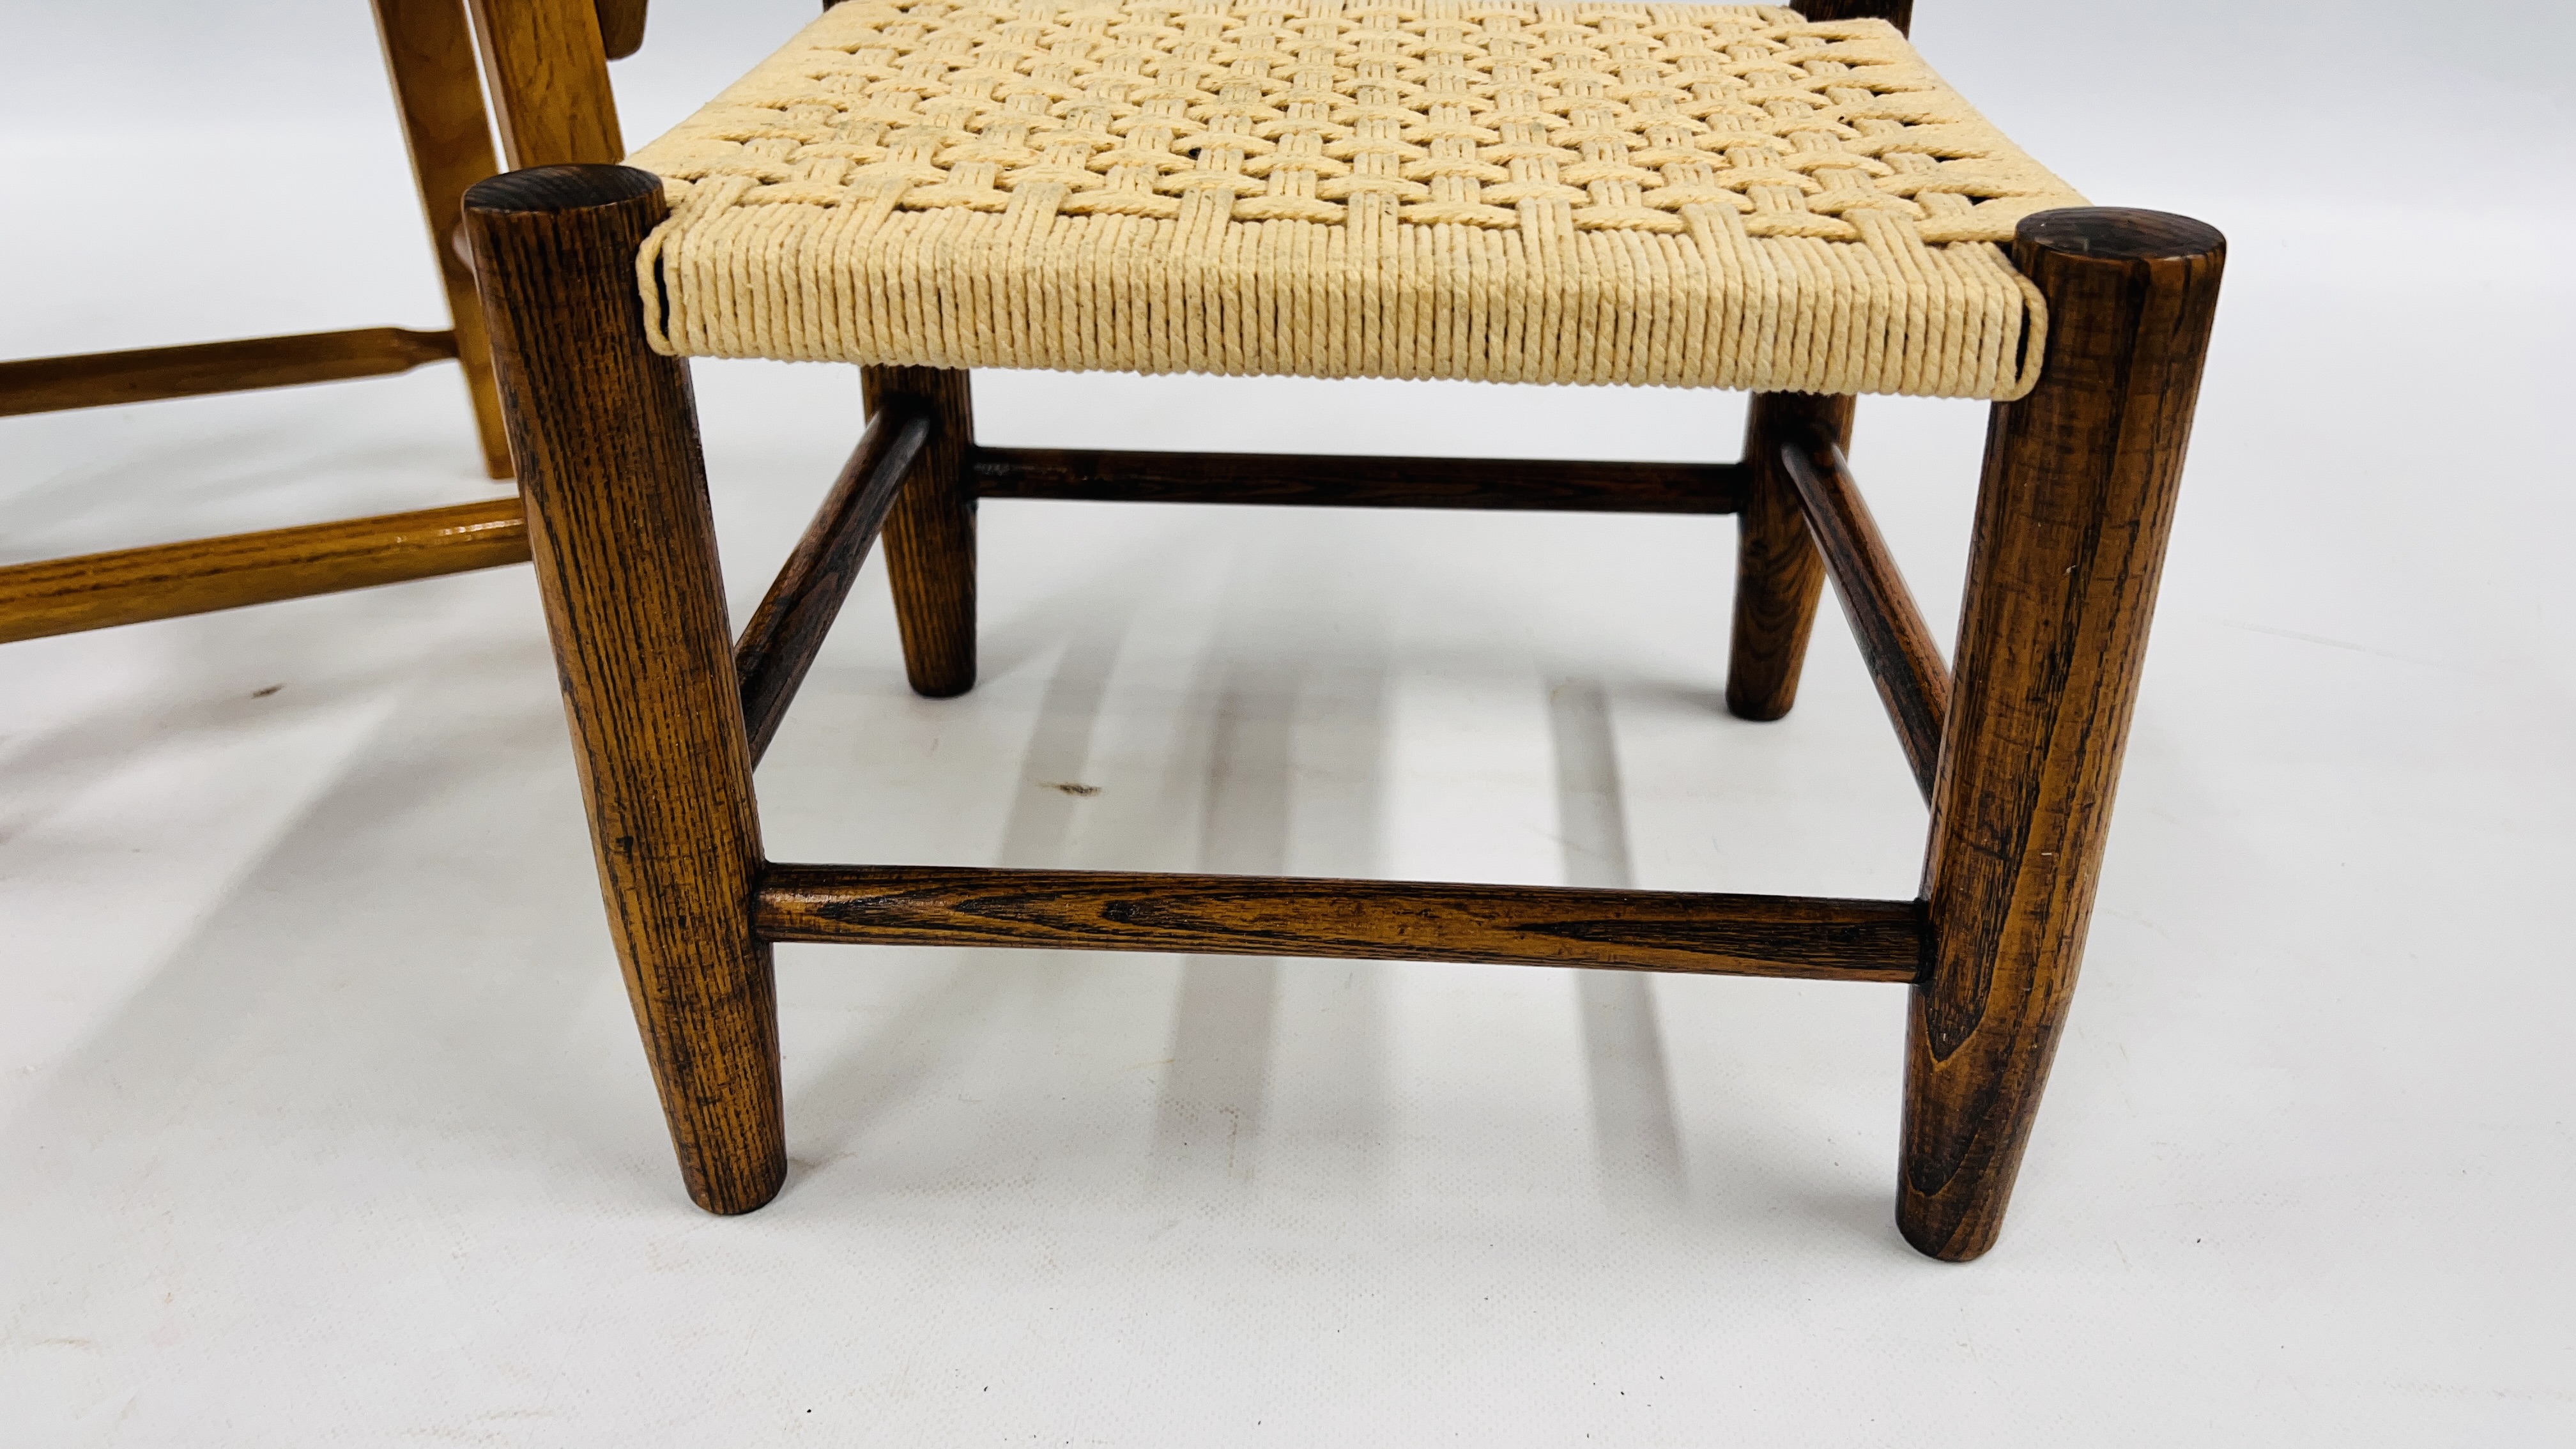 A HANDMADE SOLID OAK CHILD'S CHAIR AND SMALL OAK STOOL WITH WOVEN SEAT. - Image 7 of 9